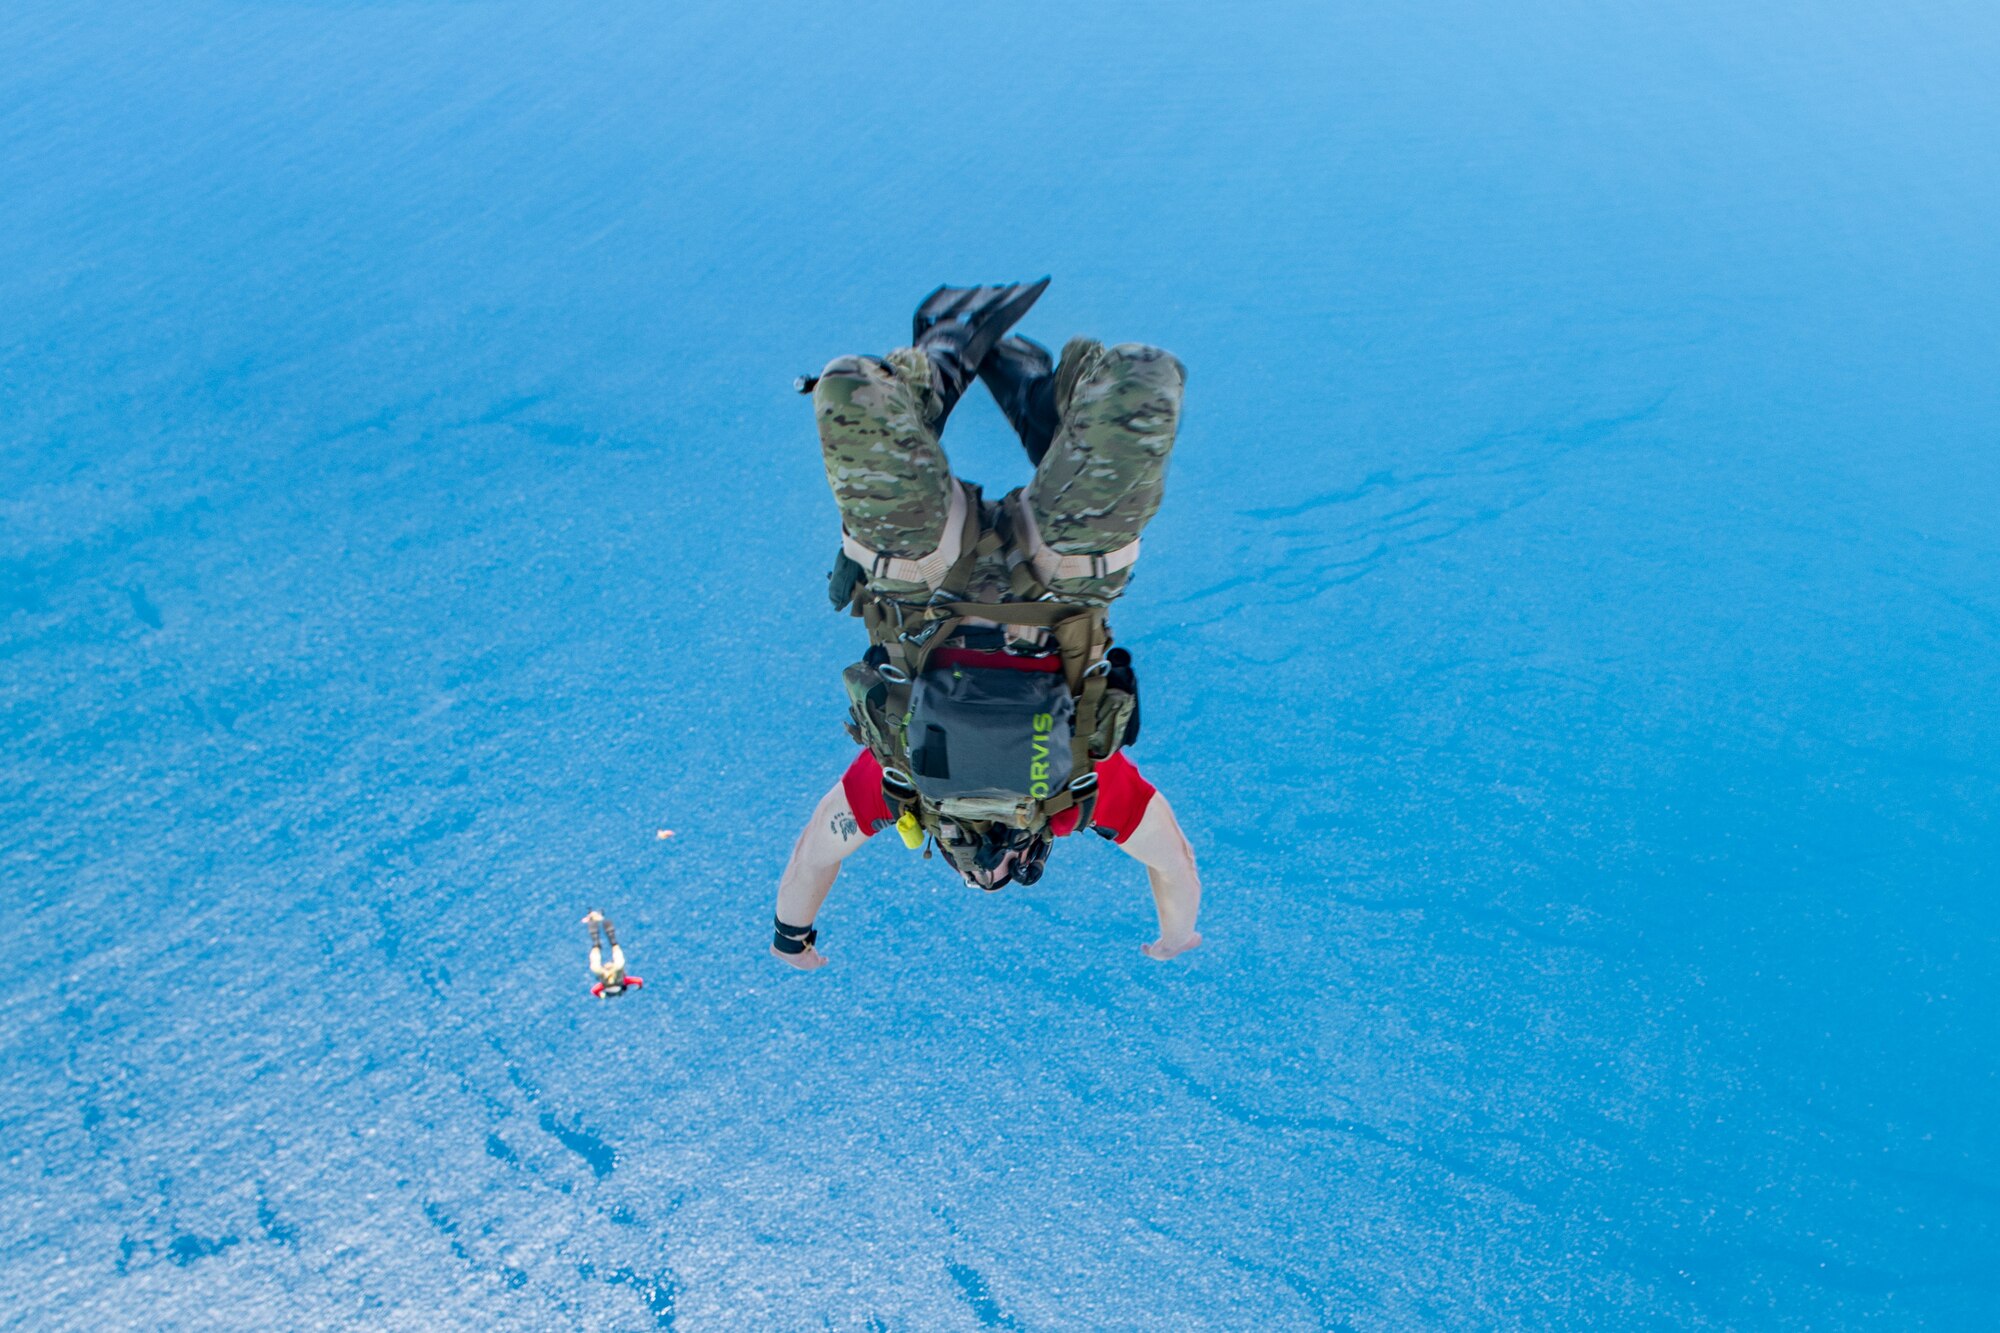 A military member jumps out over the ocean